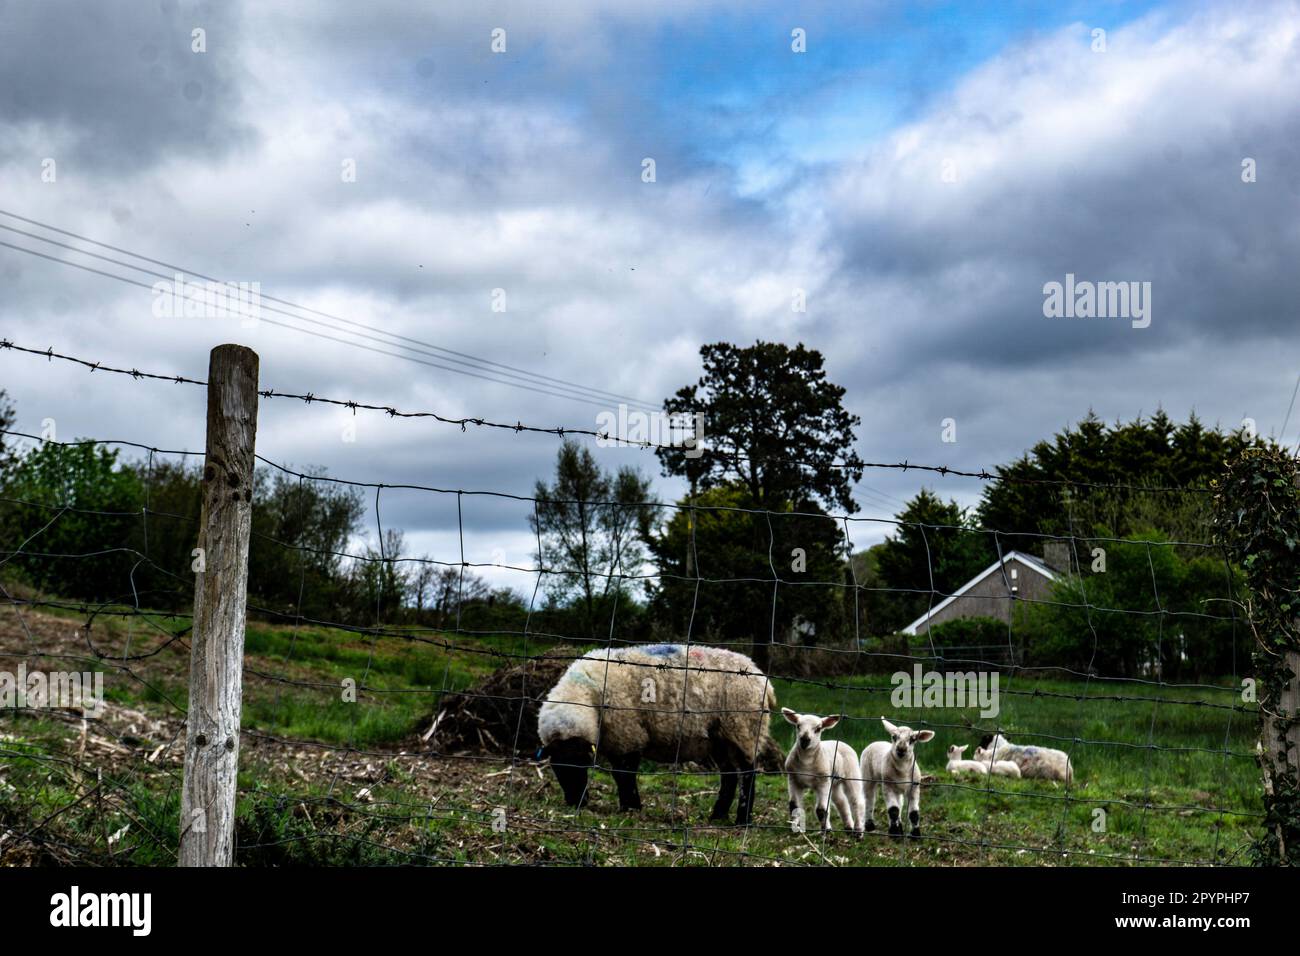 Newly born lambs with their mother in a field in Fermanagh, Northern Ireland. Stock Photo